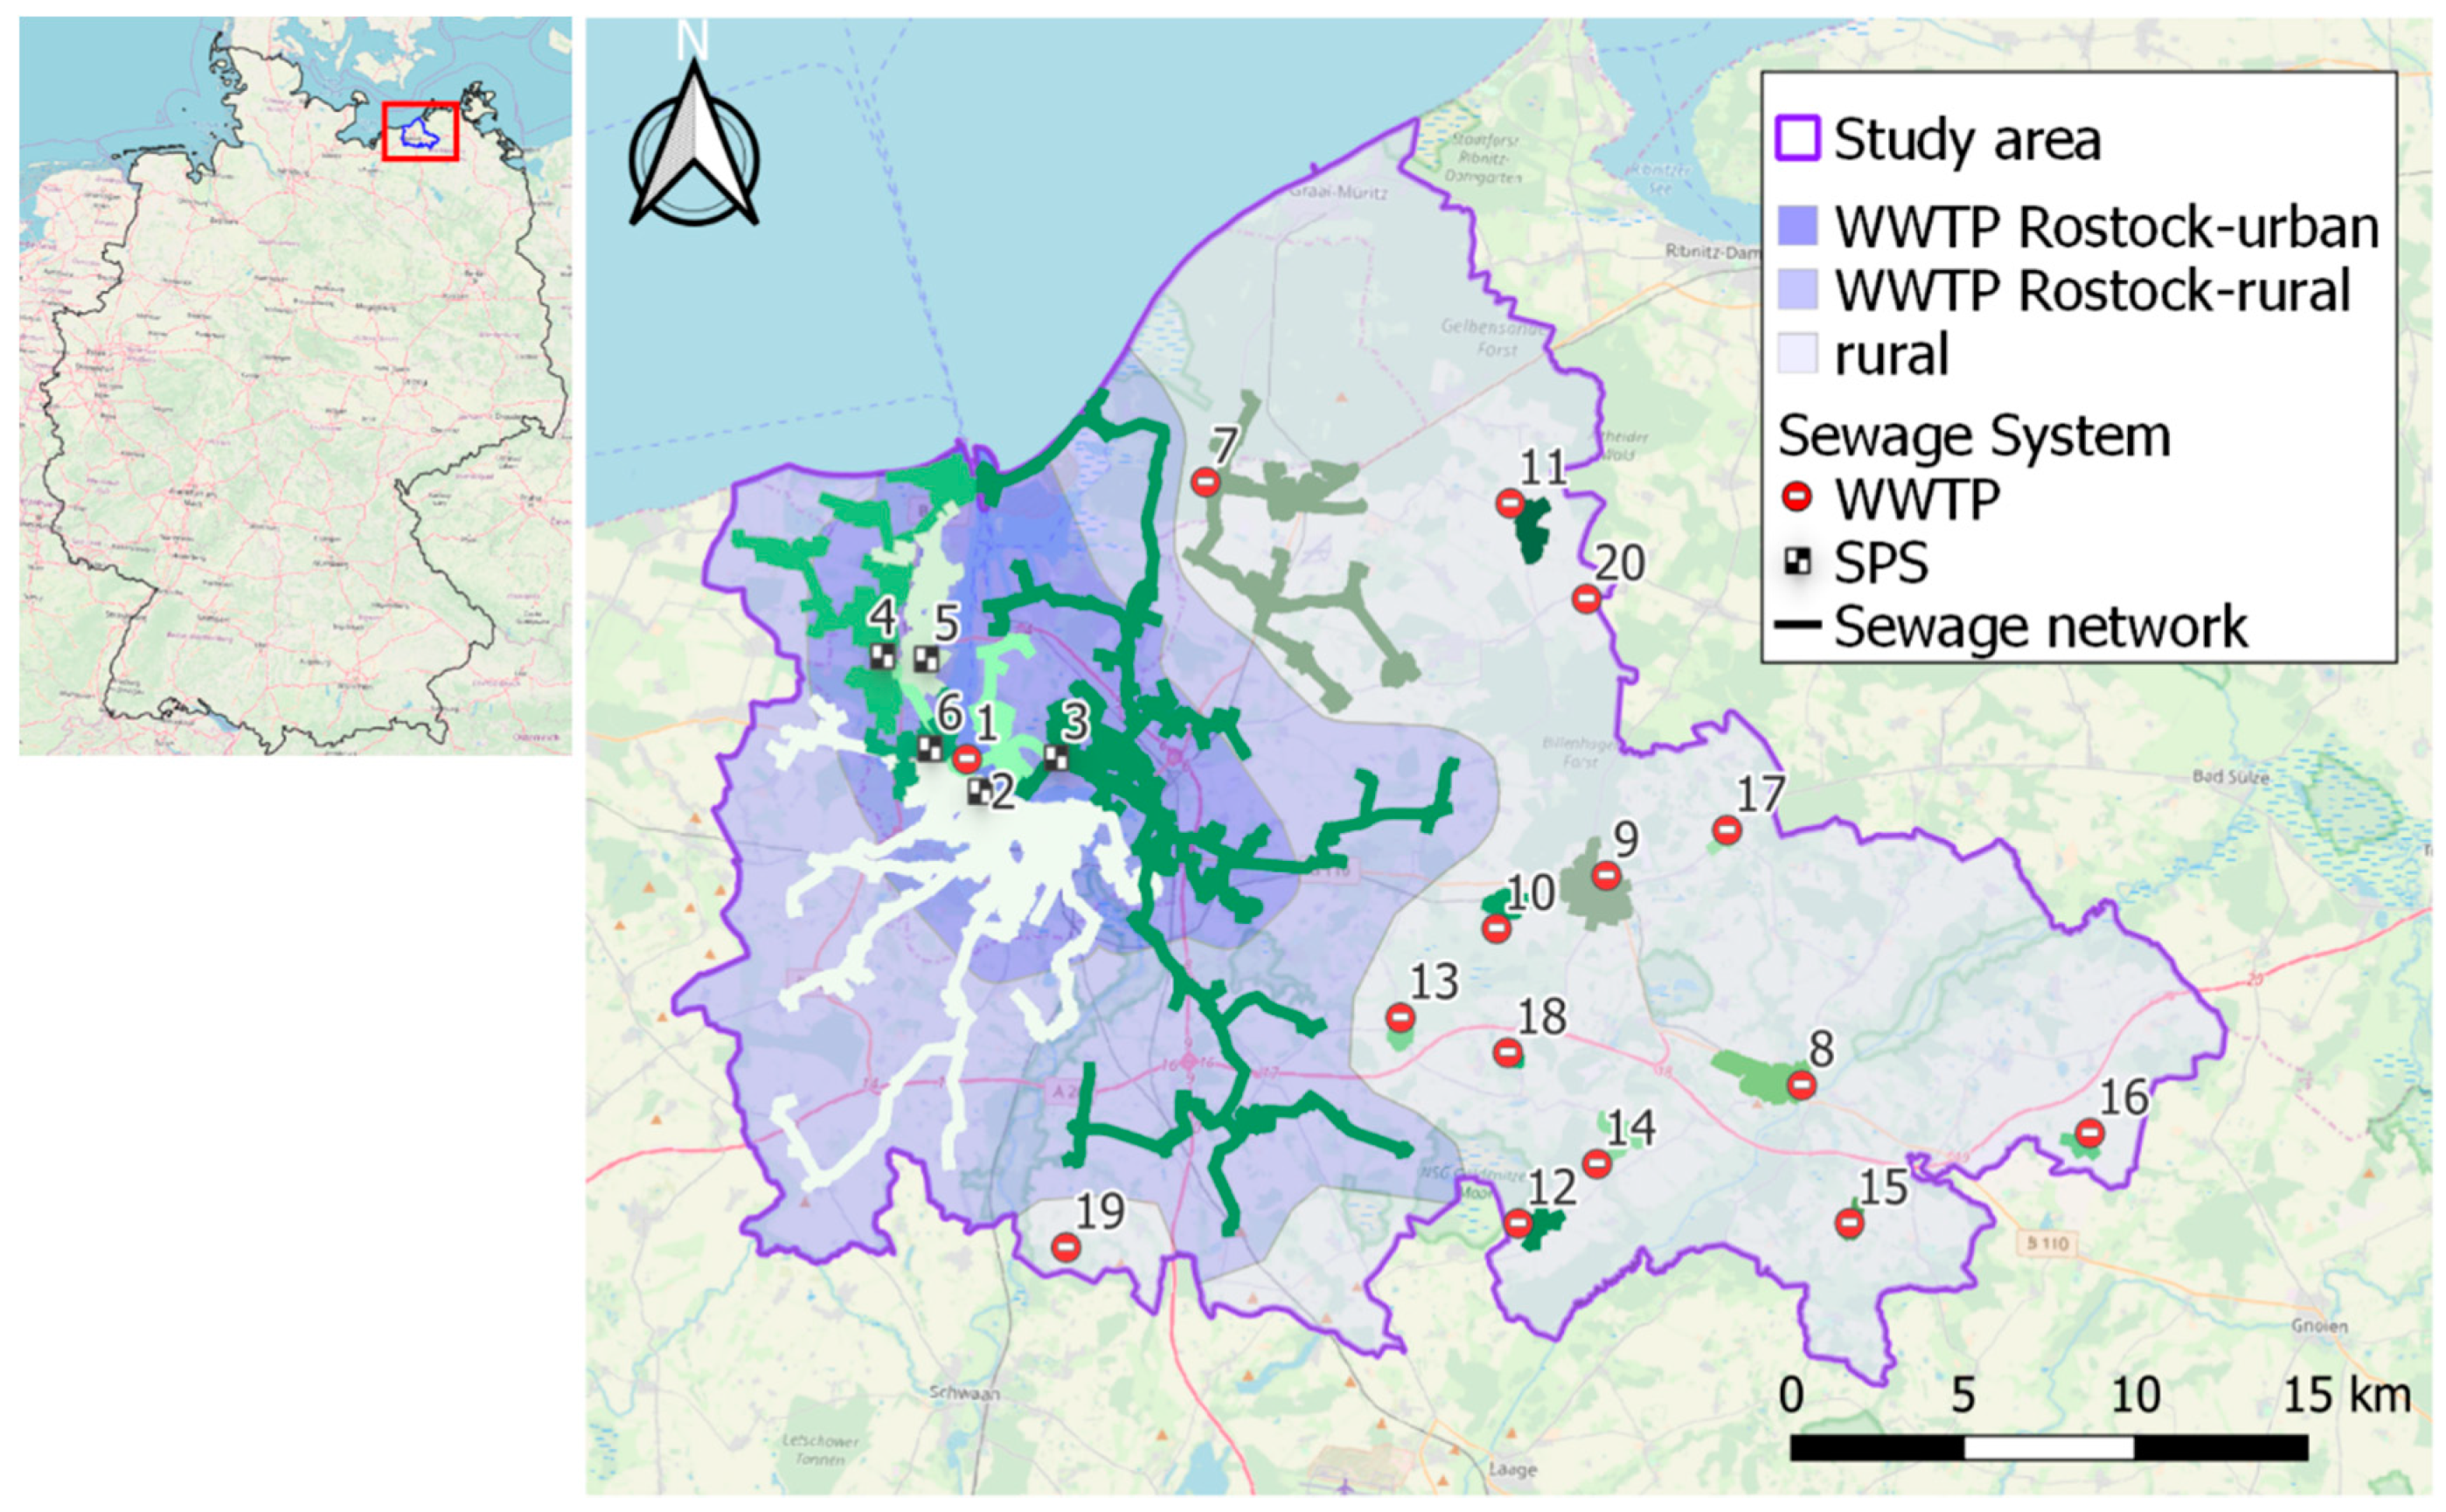 Schilling & Tränckner 2002 Estimation of Wastewater Discharges by Means of OpenStreetMap Data, Water, Fig. 1